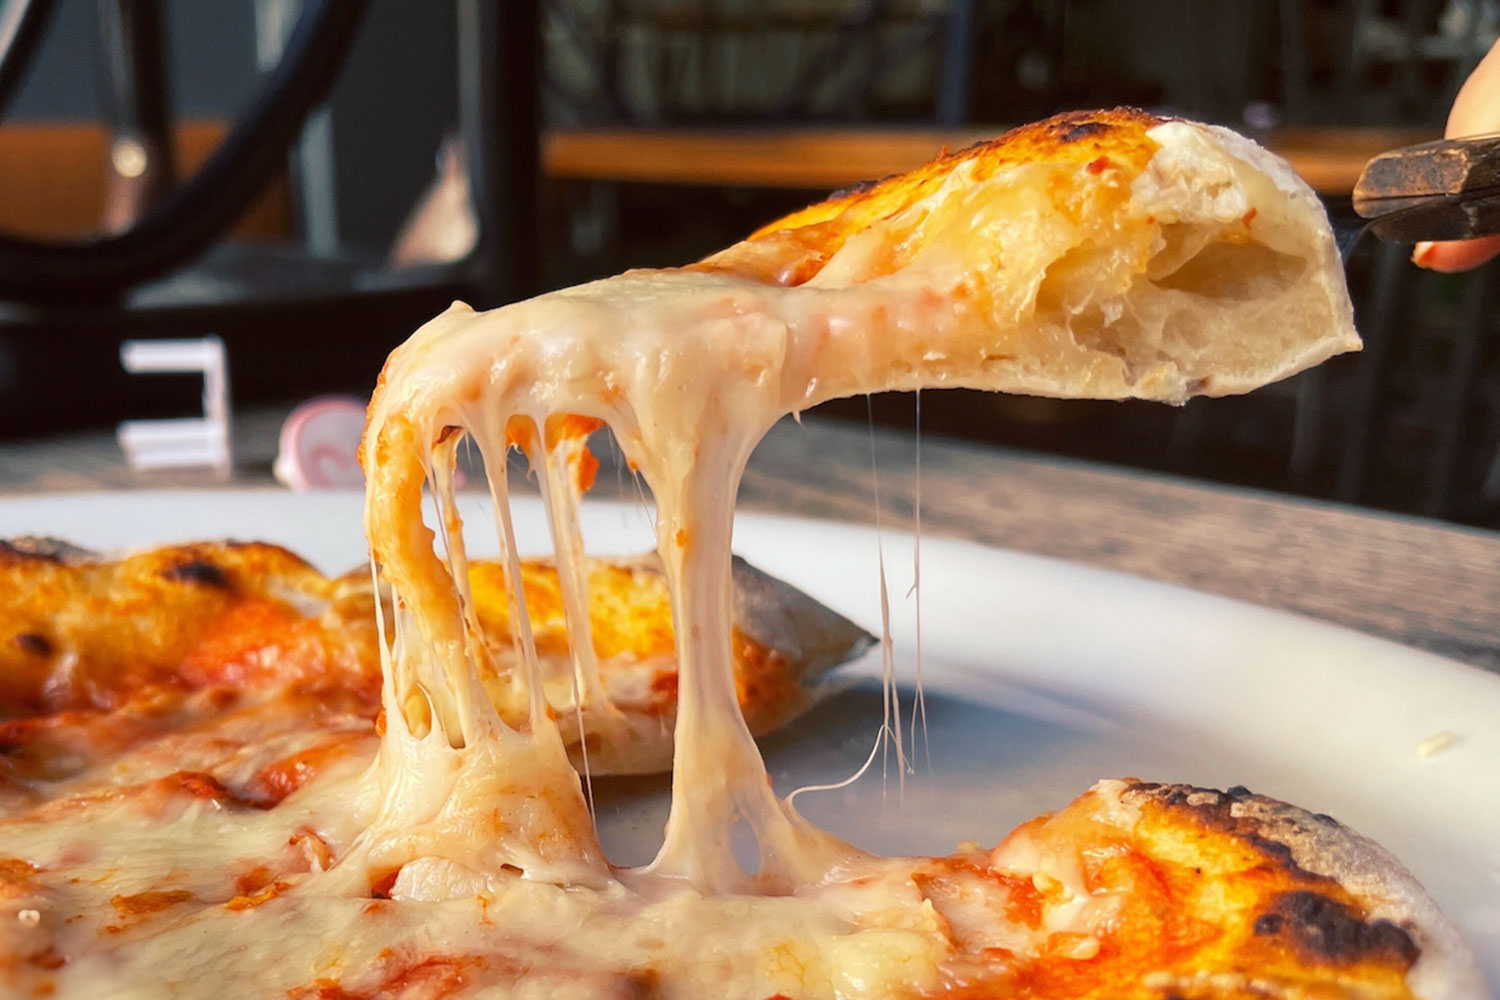 Slice of cheese pizza is lifted with pie server, strings of cheese stretching from it